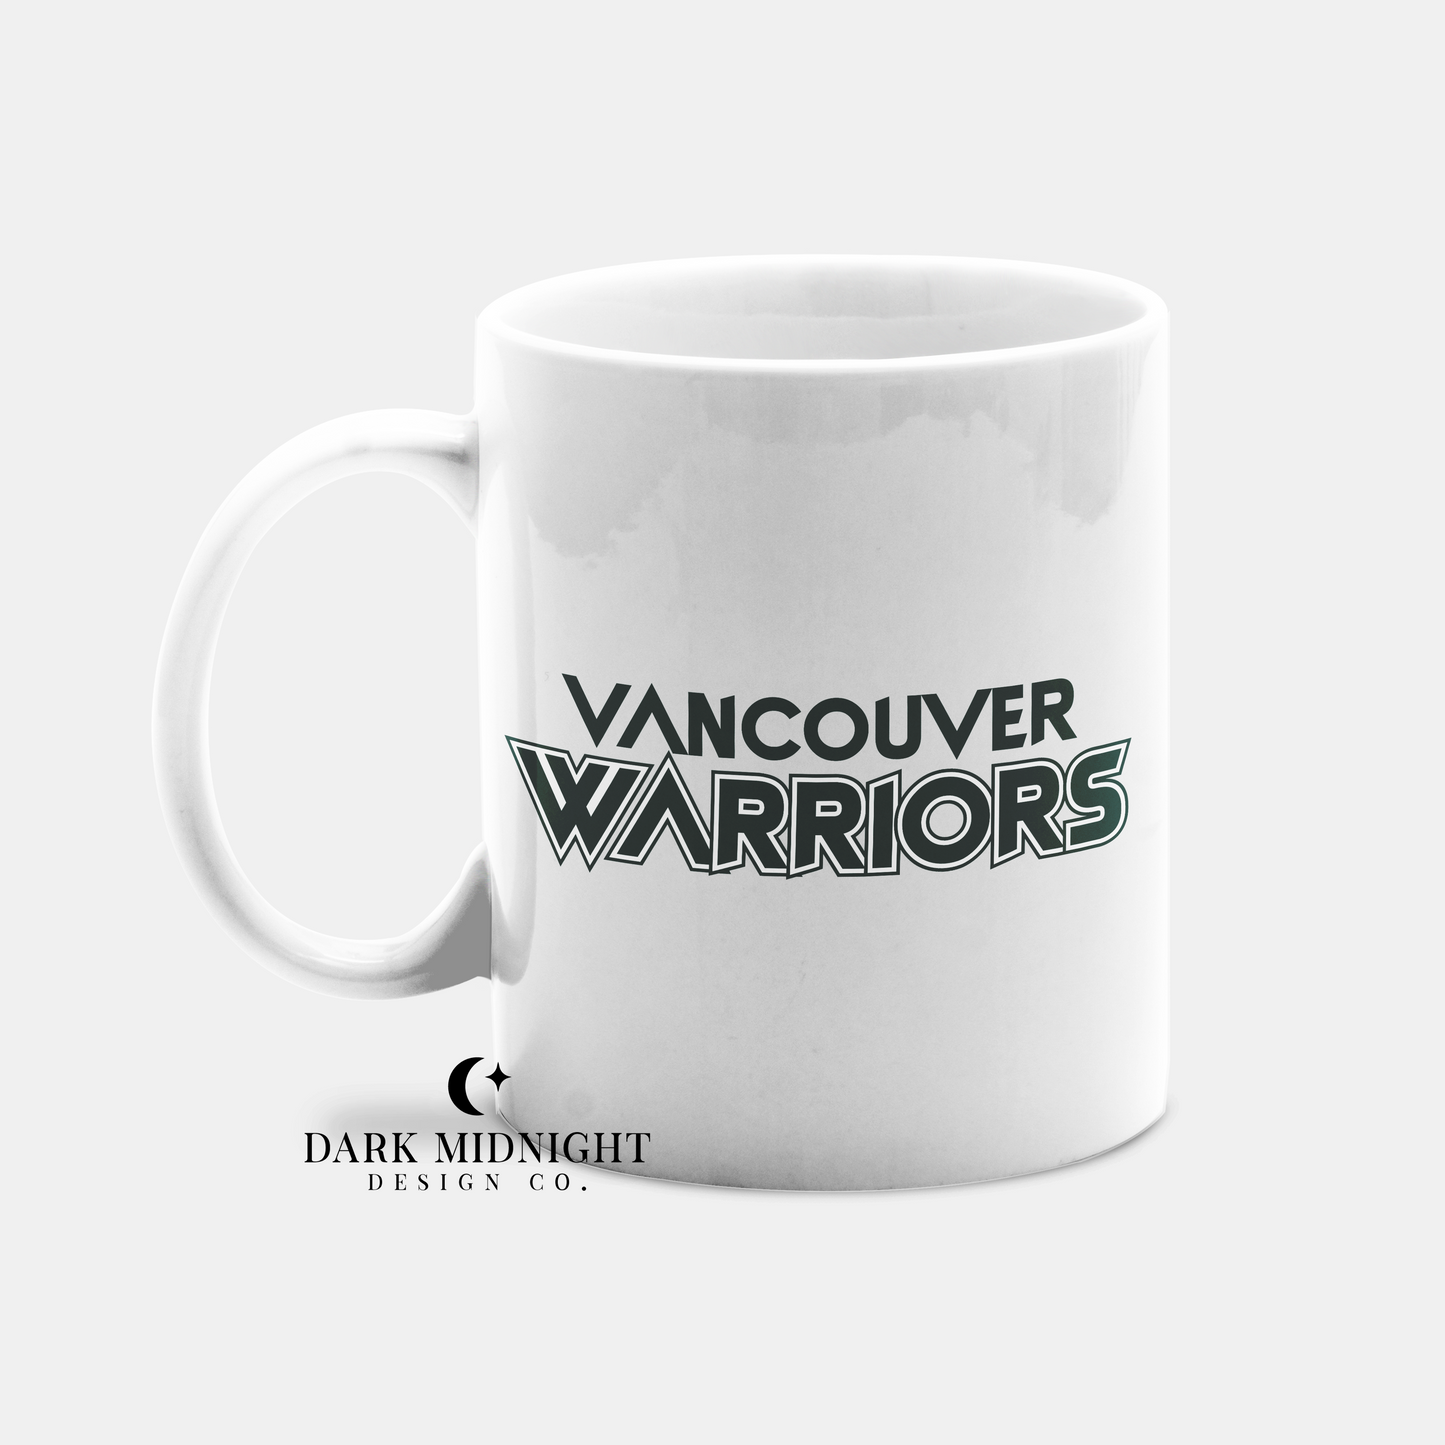 Vancouver Warriors 15oz Mug - Officially Licensed Greatest Love Series